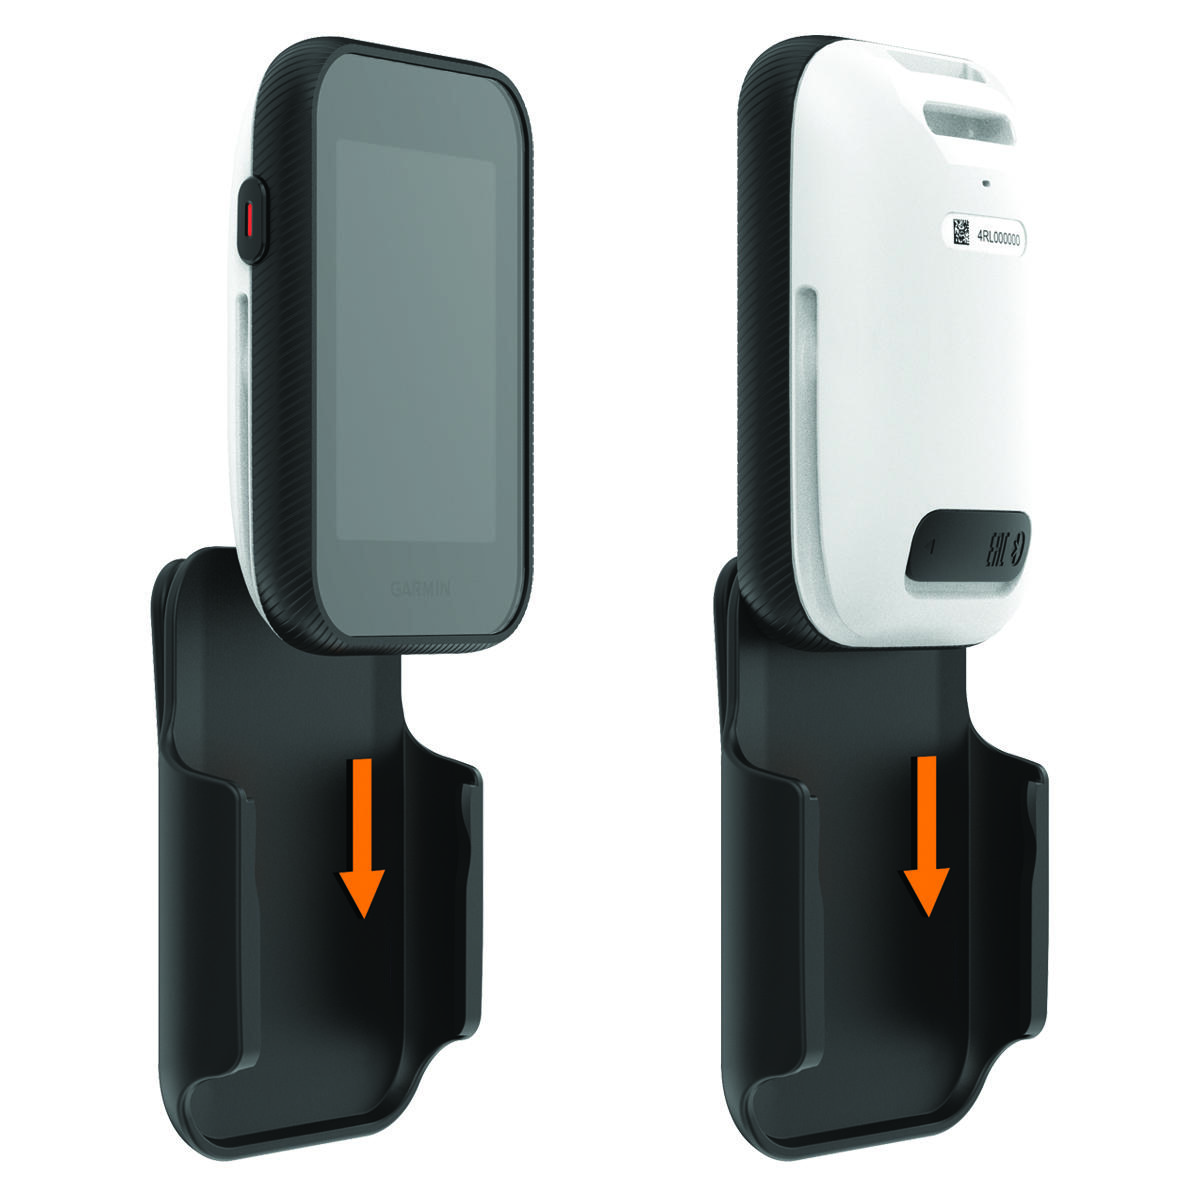 Front and back views of the device sliding into the clip